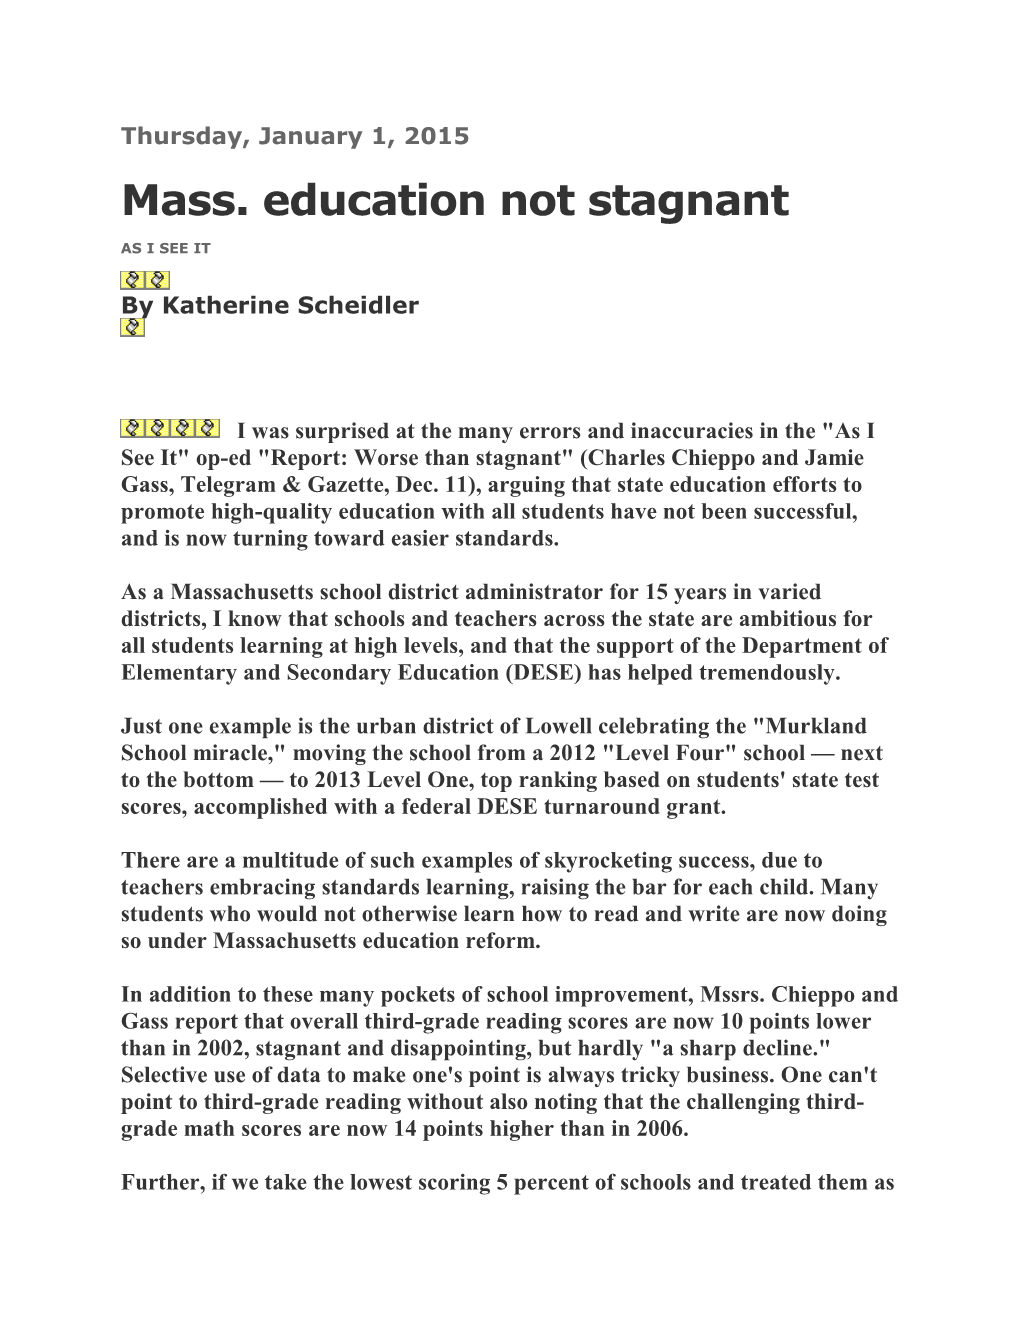 Mass. Education Not Stagnant